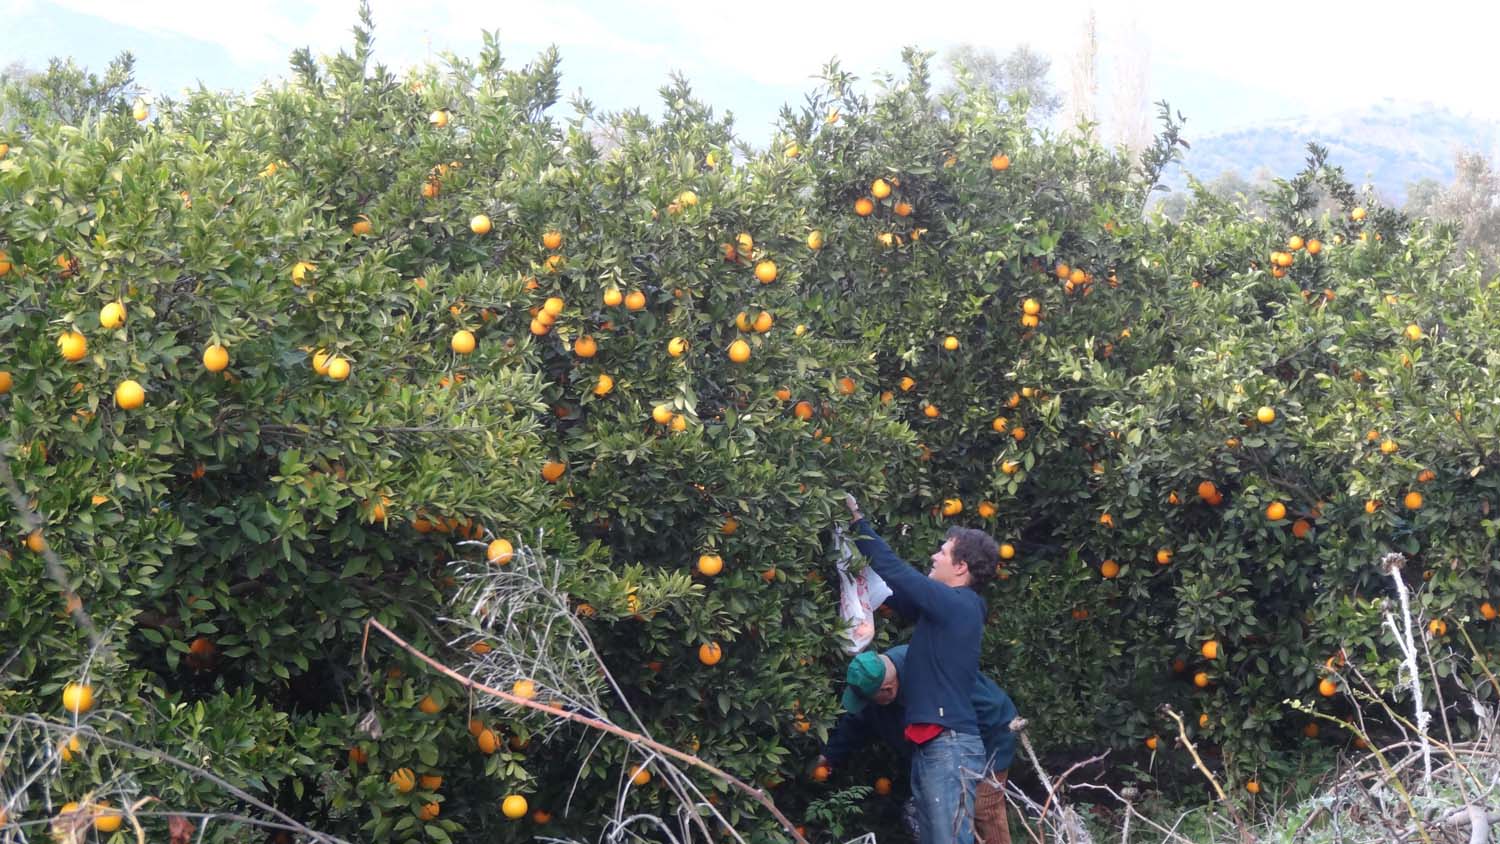 also in Turkey we meet so many friendly people - Jon has to join this man to pick some fresh oranges